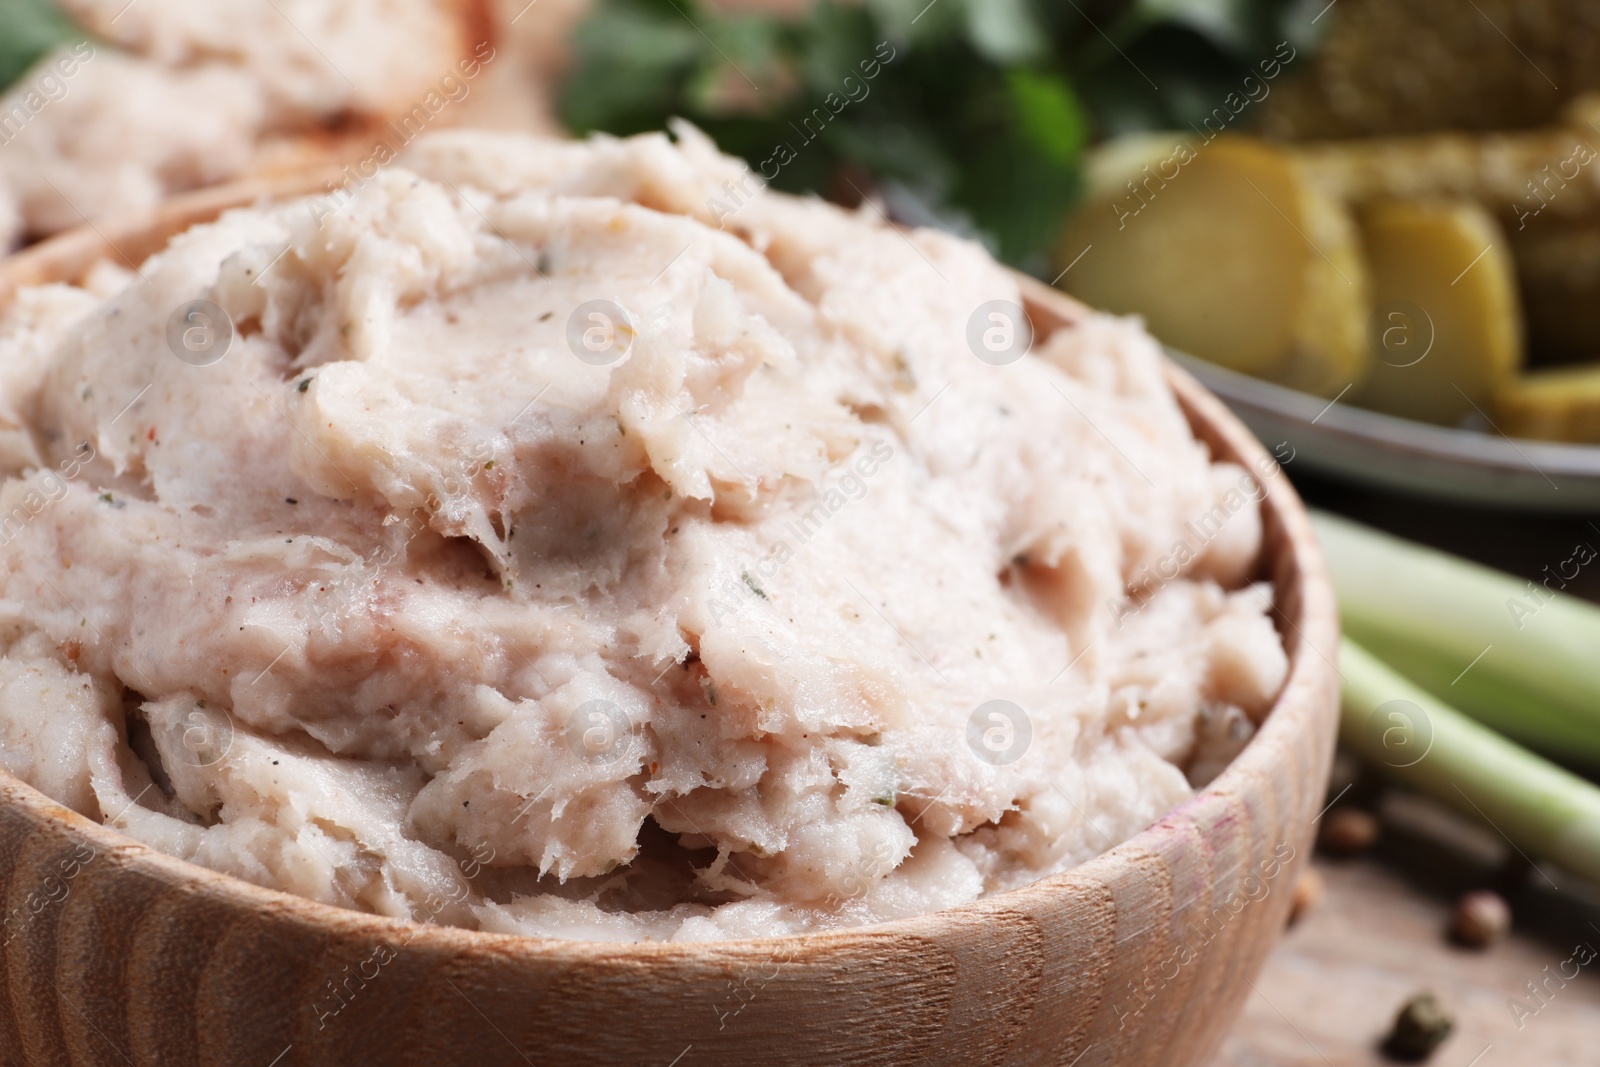 Photo of Lard spread in bowl on table, closeup